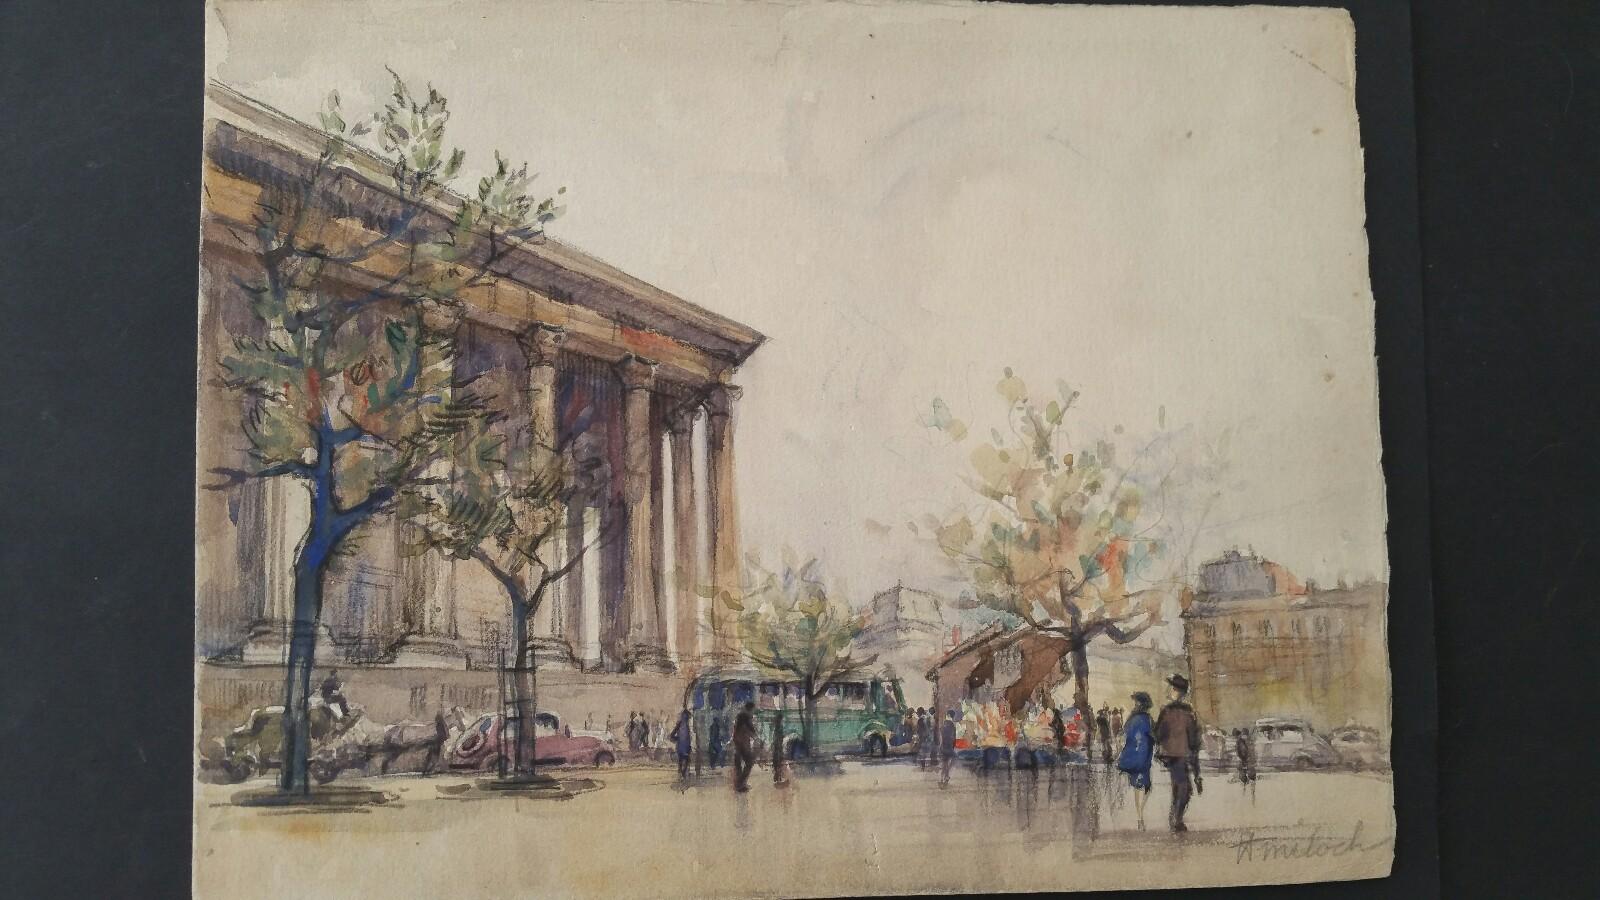 Paris: L'eglise de la Madeleine, a Pair
by Henri Miloch (1898-1979)
signed lower right on both
watercolour and gouache painting on artist's paper, unframed

Sheet:: 9.75 x 12.5 inches

A charming pair of paintings by the highly regarded painter,